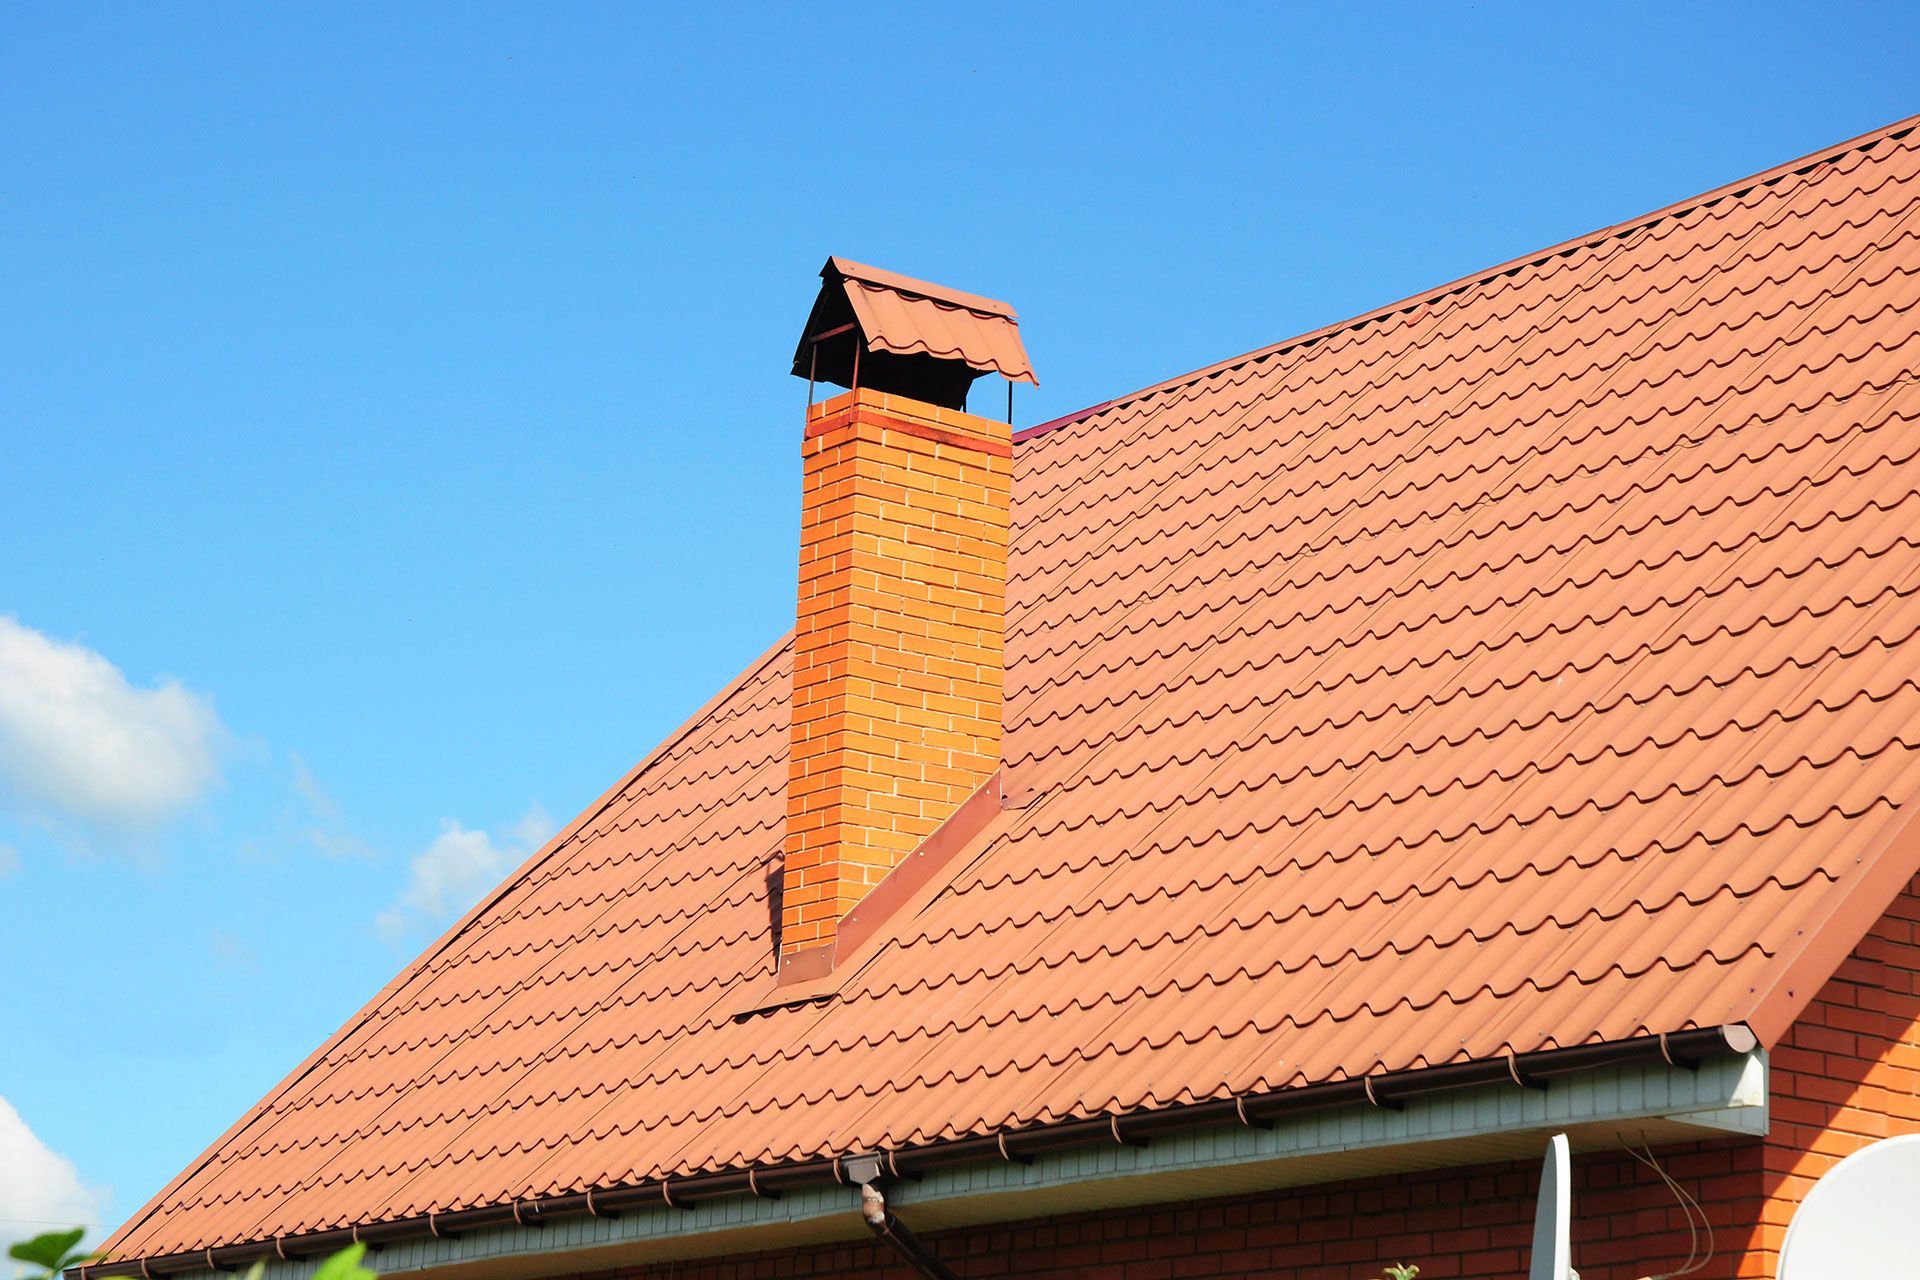 A brick chimney on the roof of a house